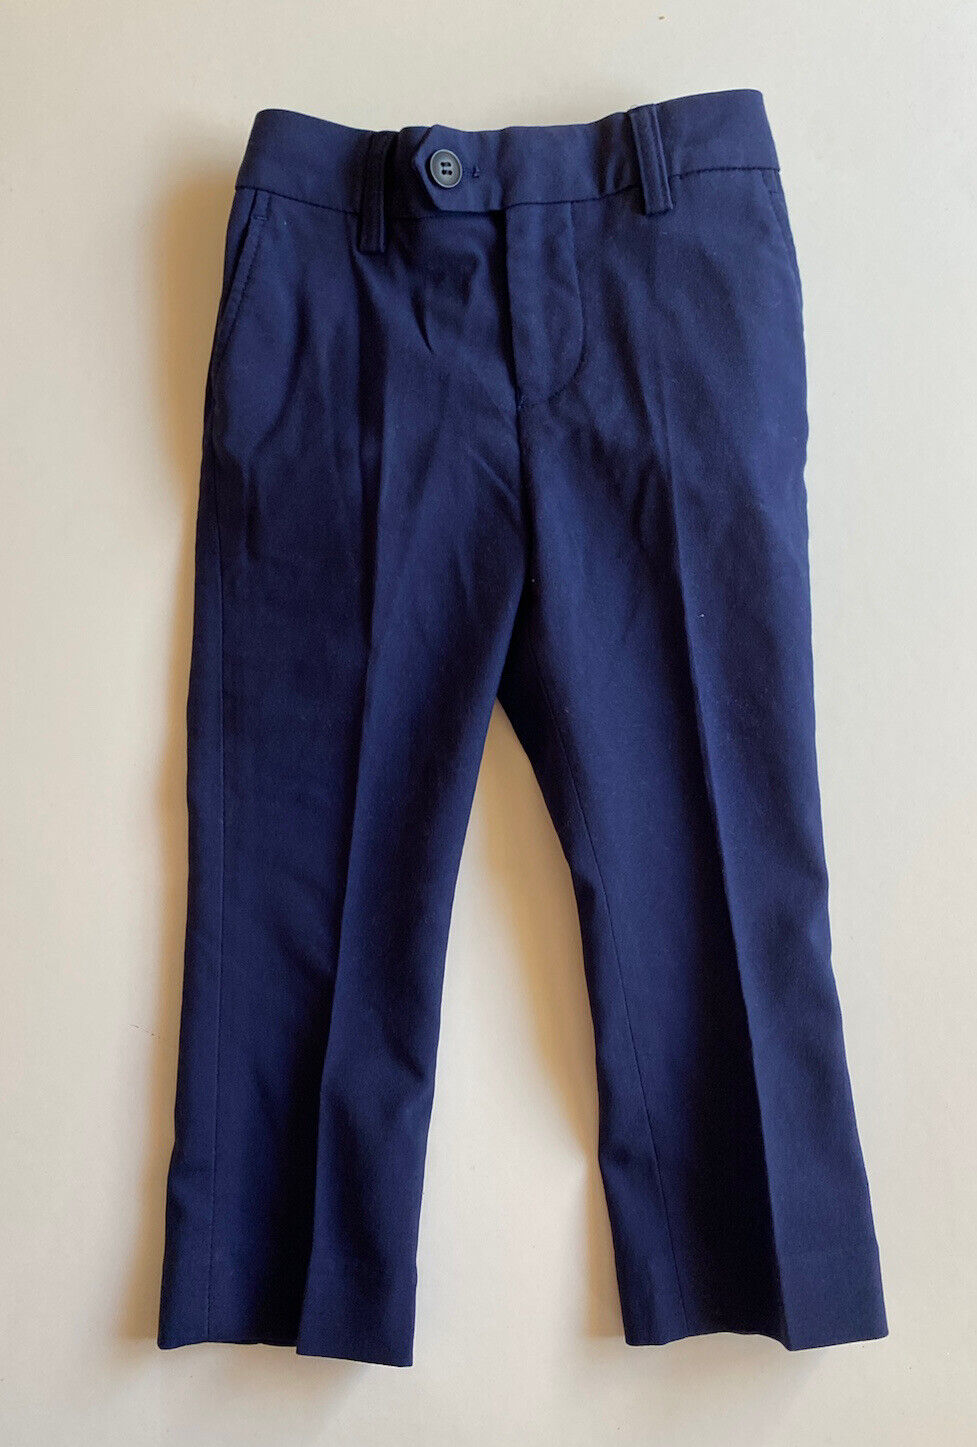 Next baby boy size 18-24 months navy blue fitted suit pants formal, VGUC